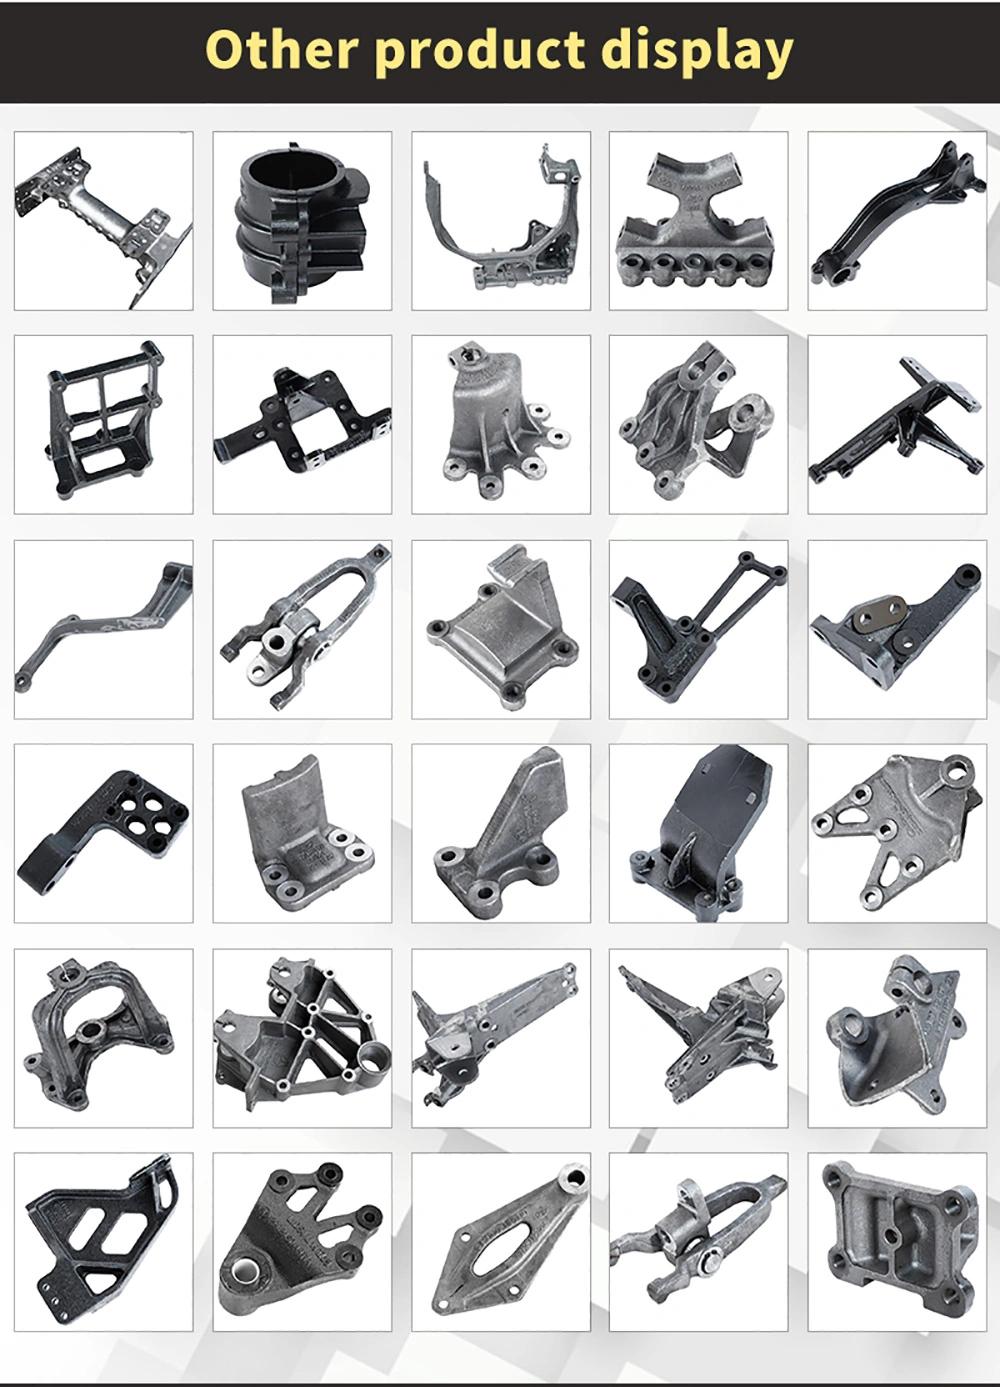 Truck Parts for Benz /Volvo / Man / Renault / Daf / Heavy Duty Truck Spare Parts Over 10000 Items